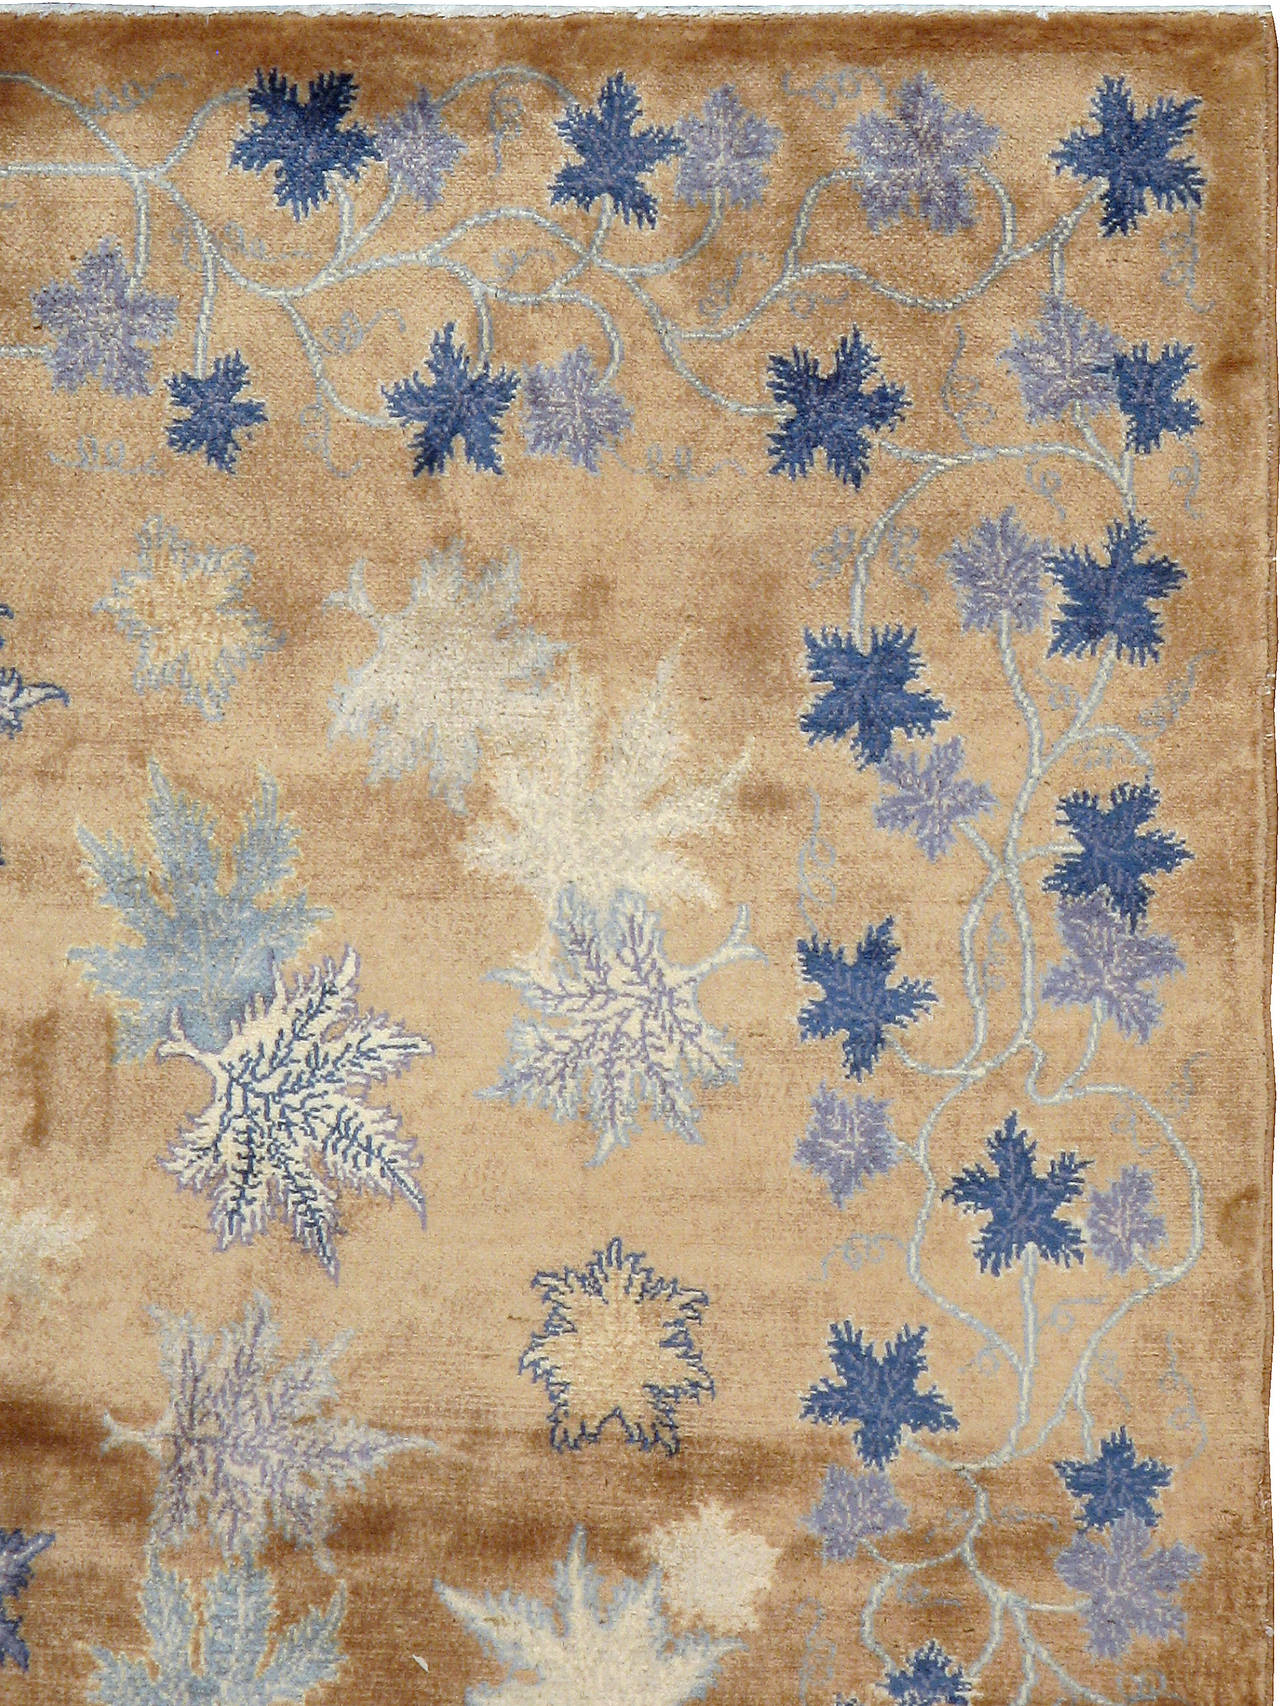 A vintage Persian Meshad carpet from the second quarter of the 20th century with an all-over leaf pattern set on a camel ground; part of a conglomerate of rugs influenced by the modernist movement.